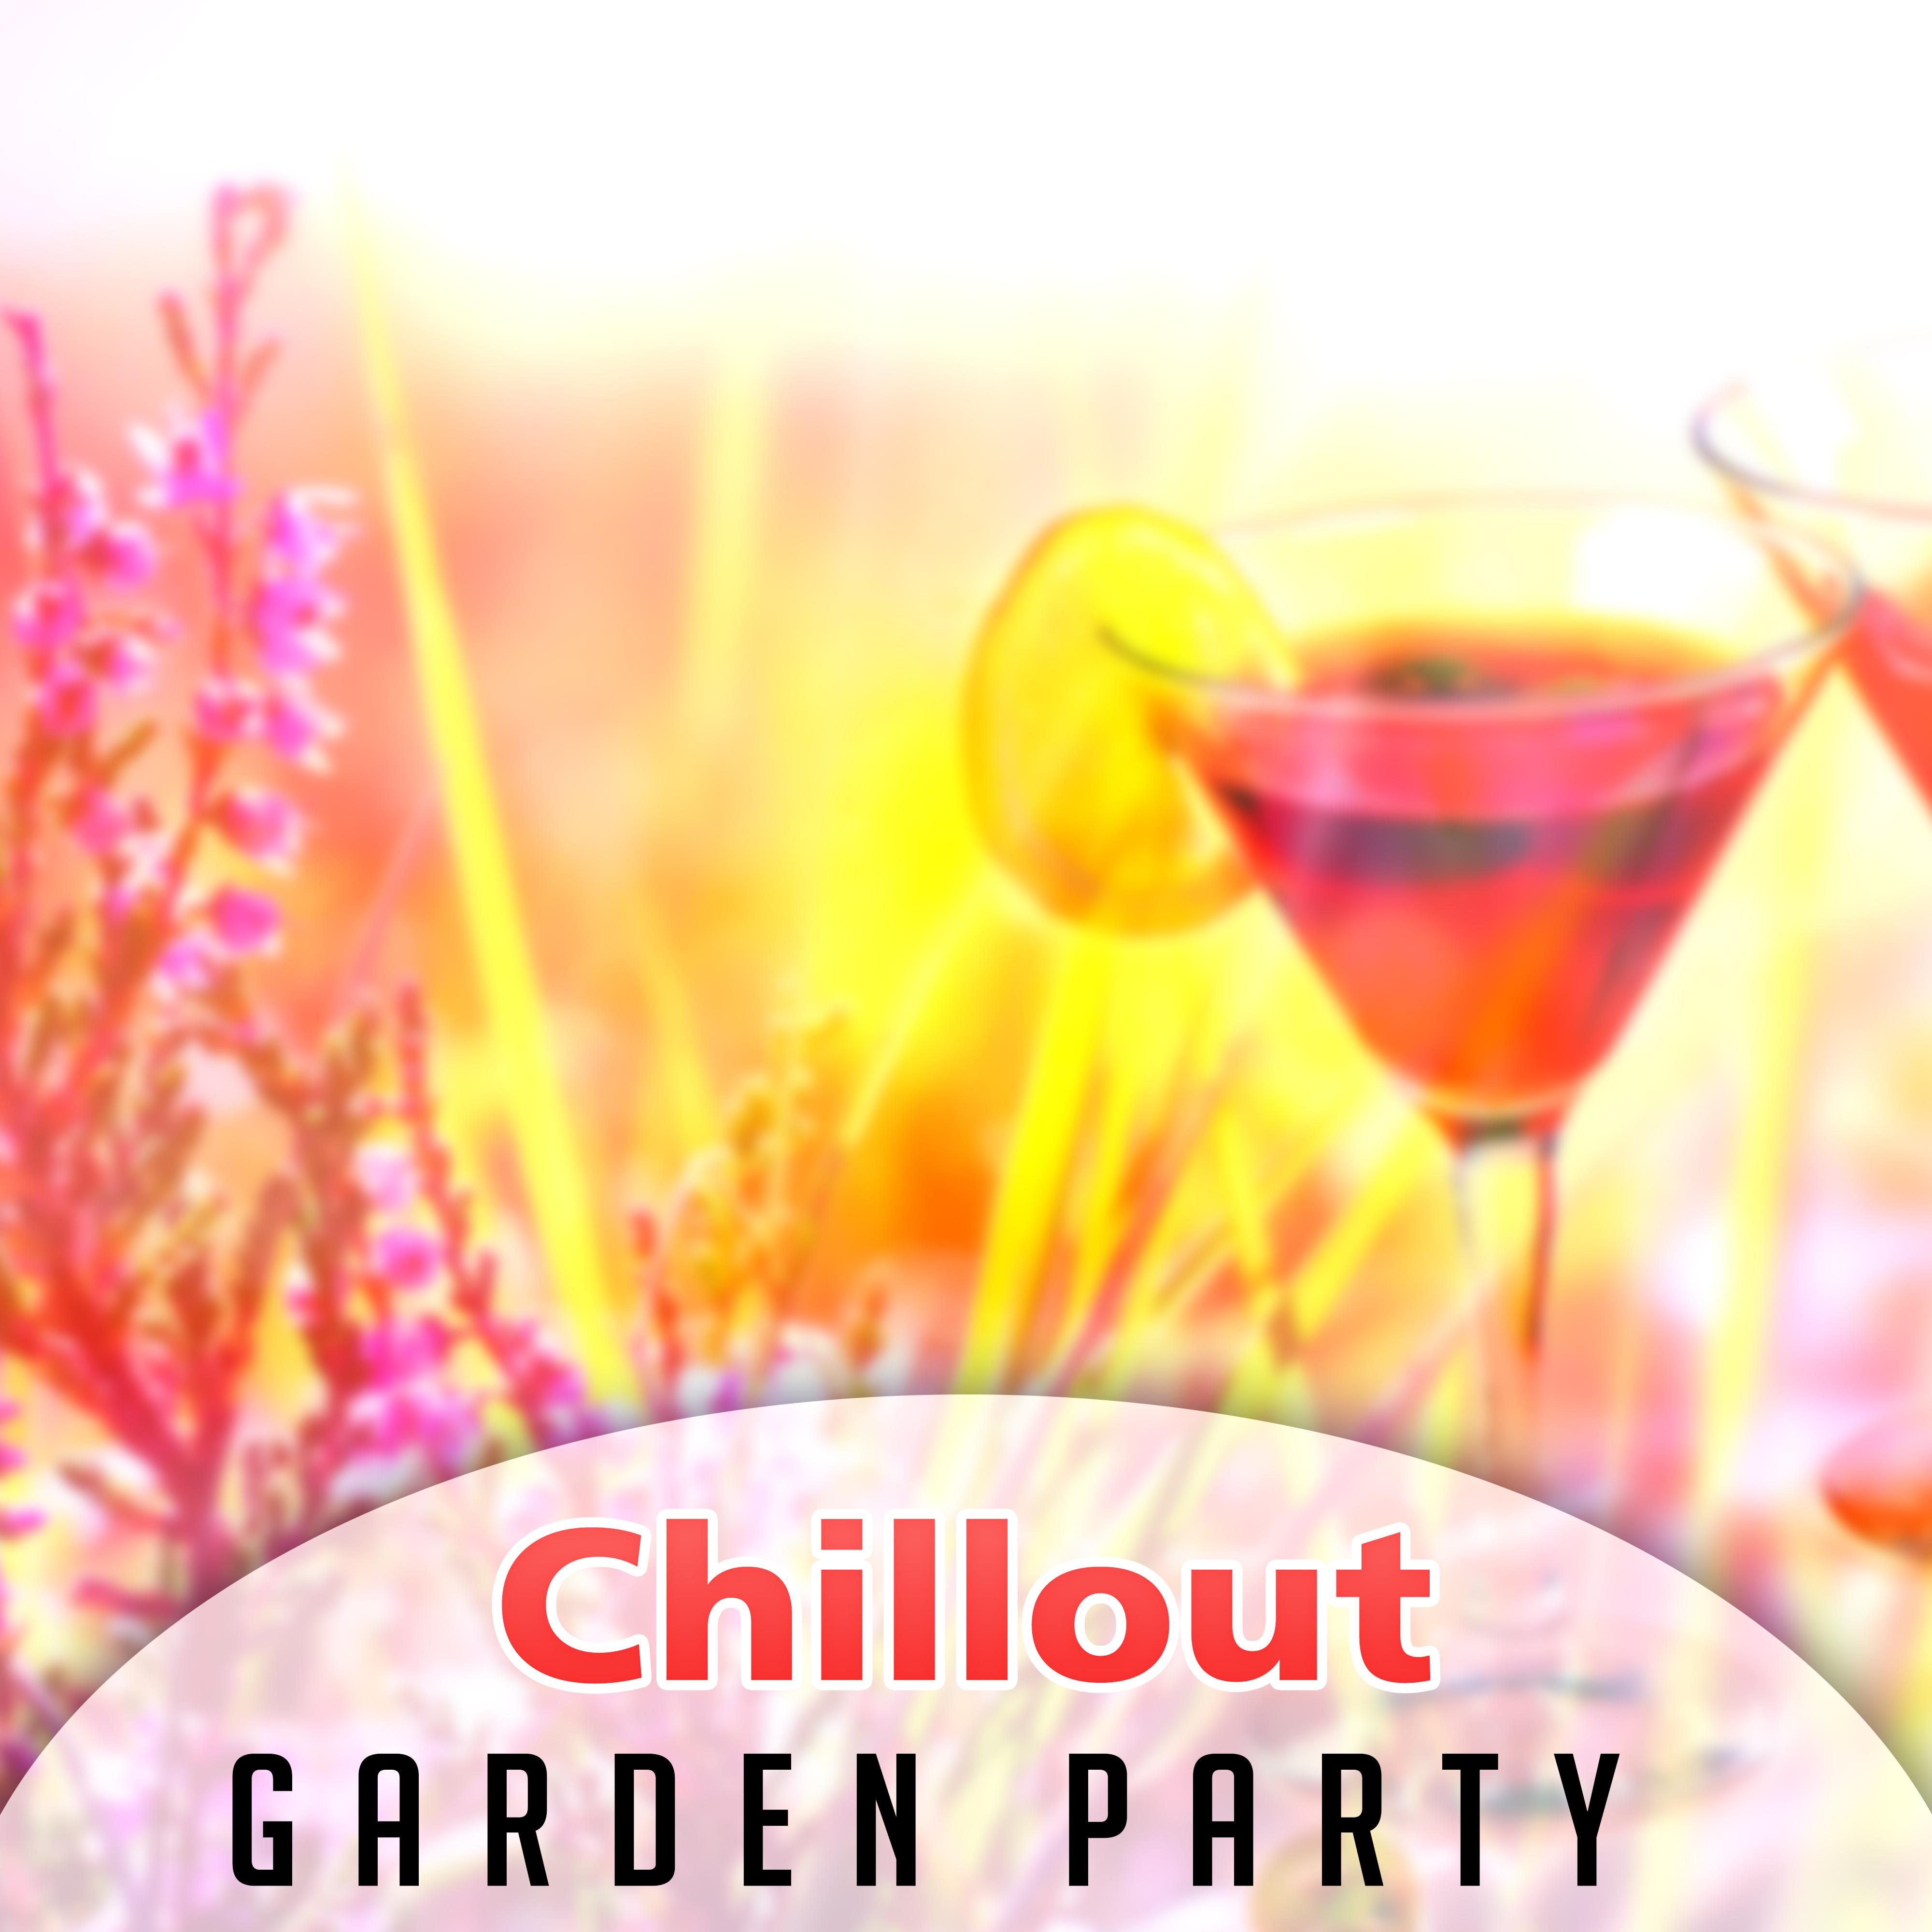 Chillout Garden Party – Chill Out 2017, Relax, Positive Vibes, Electronic Chill